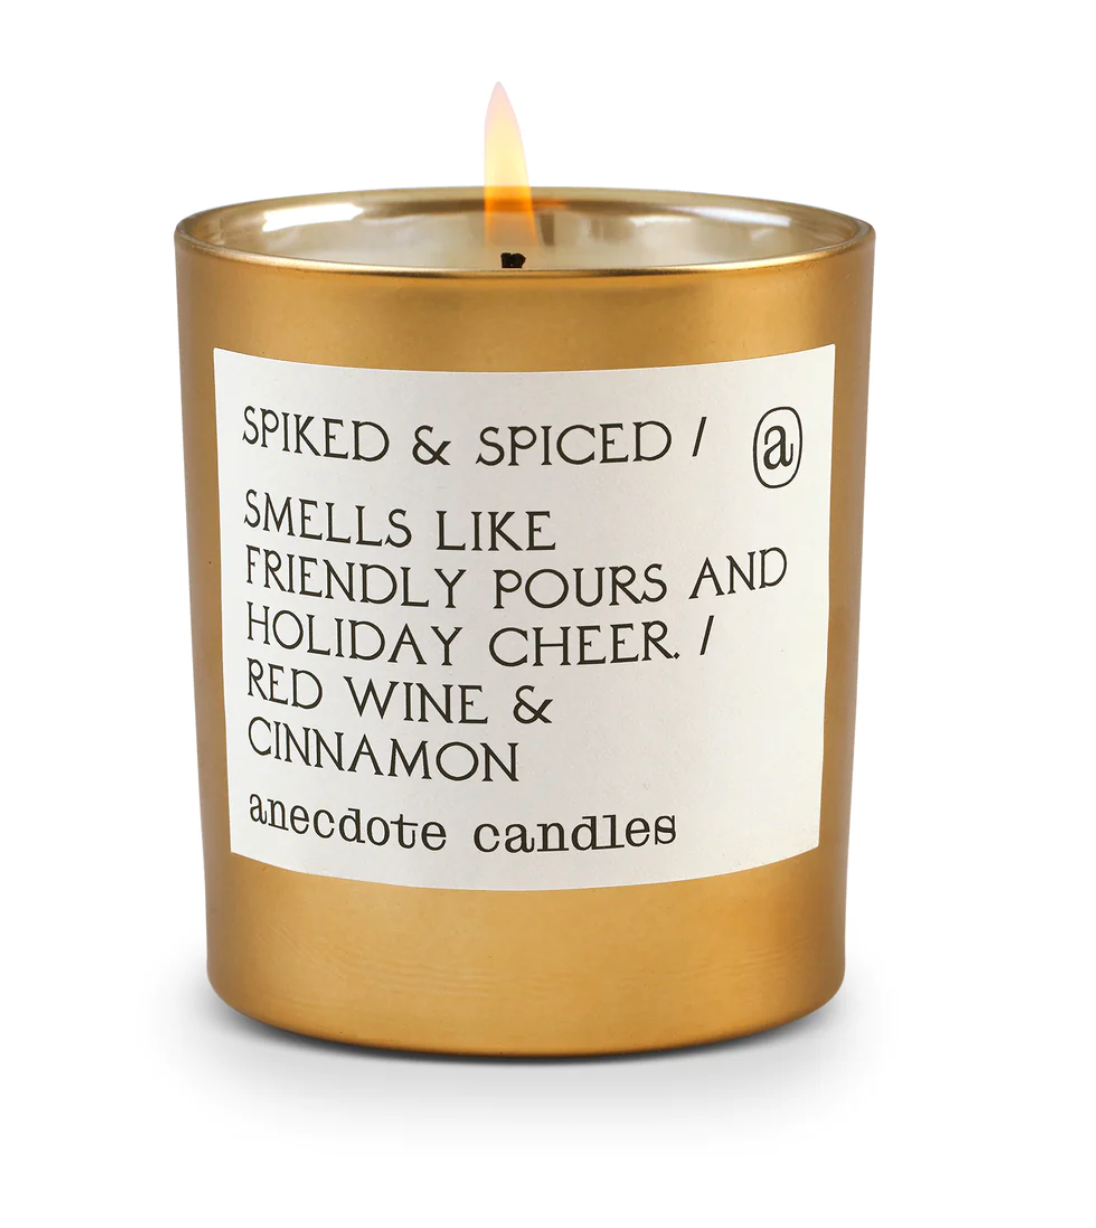 Anecdote Spiked & Spiced Candle